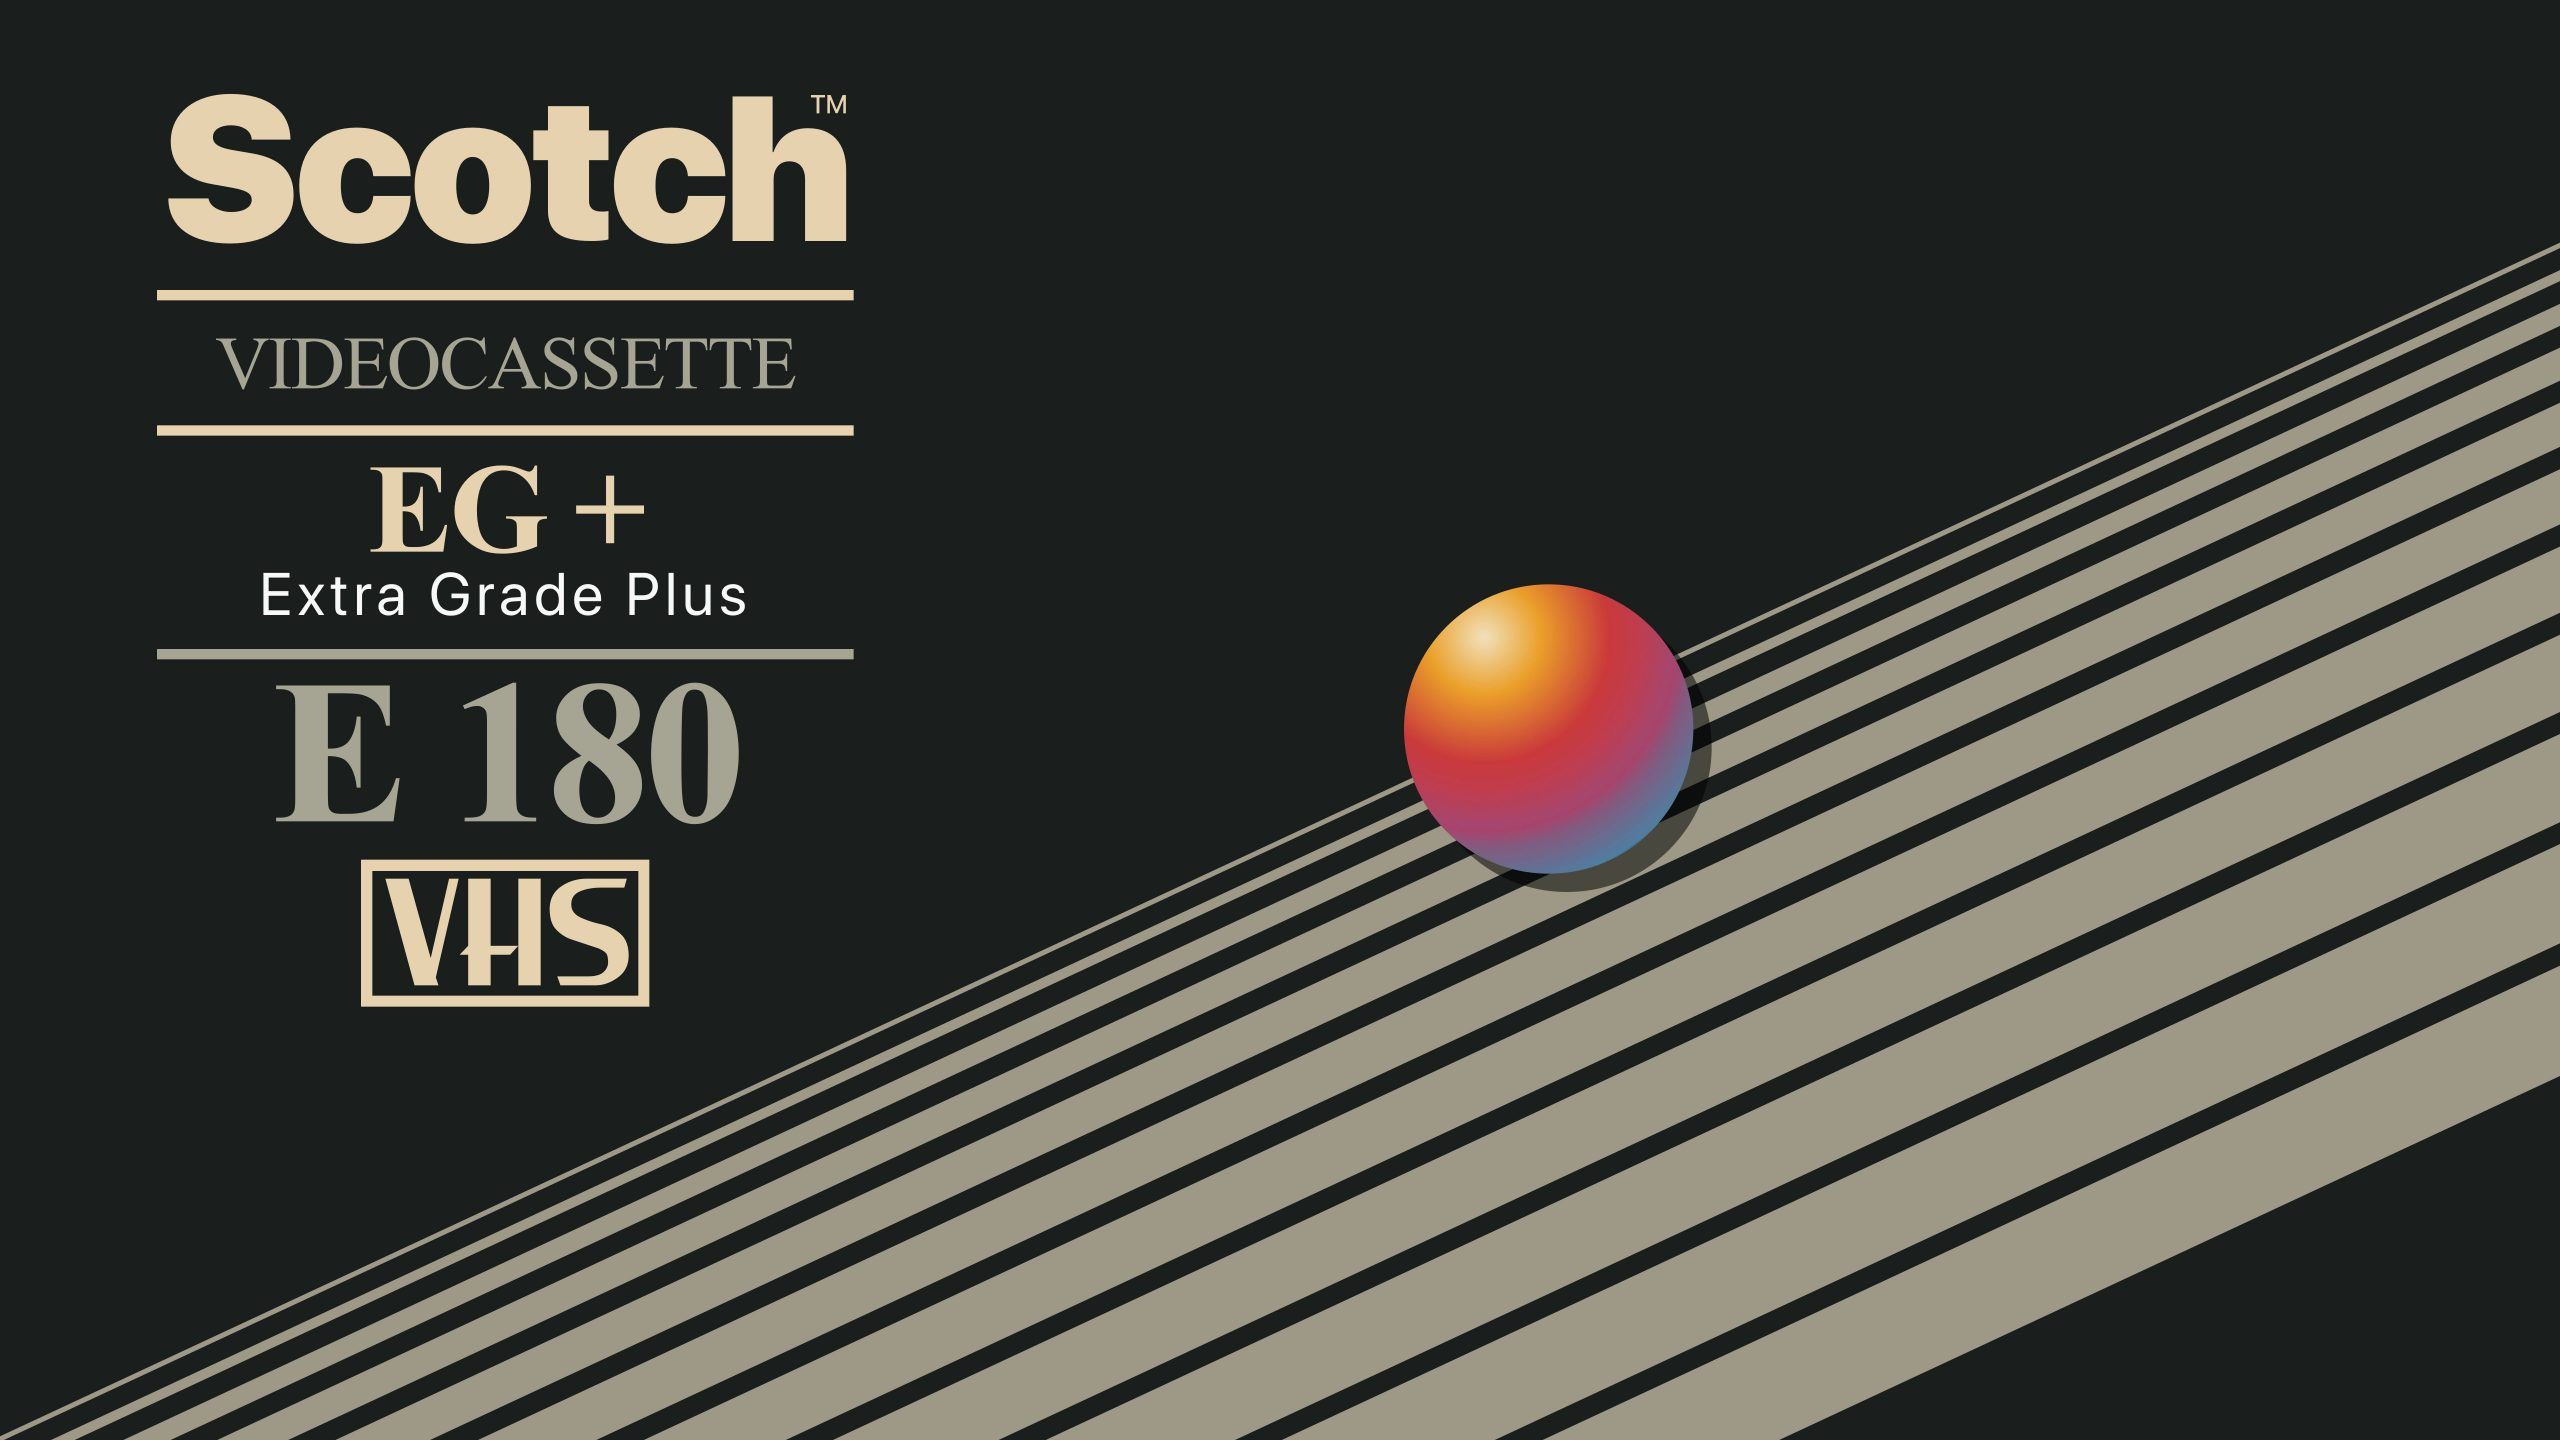 A Scotch VHS tape with a picture of an orange ball on it - VHS